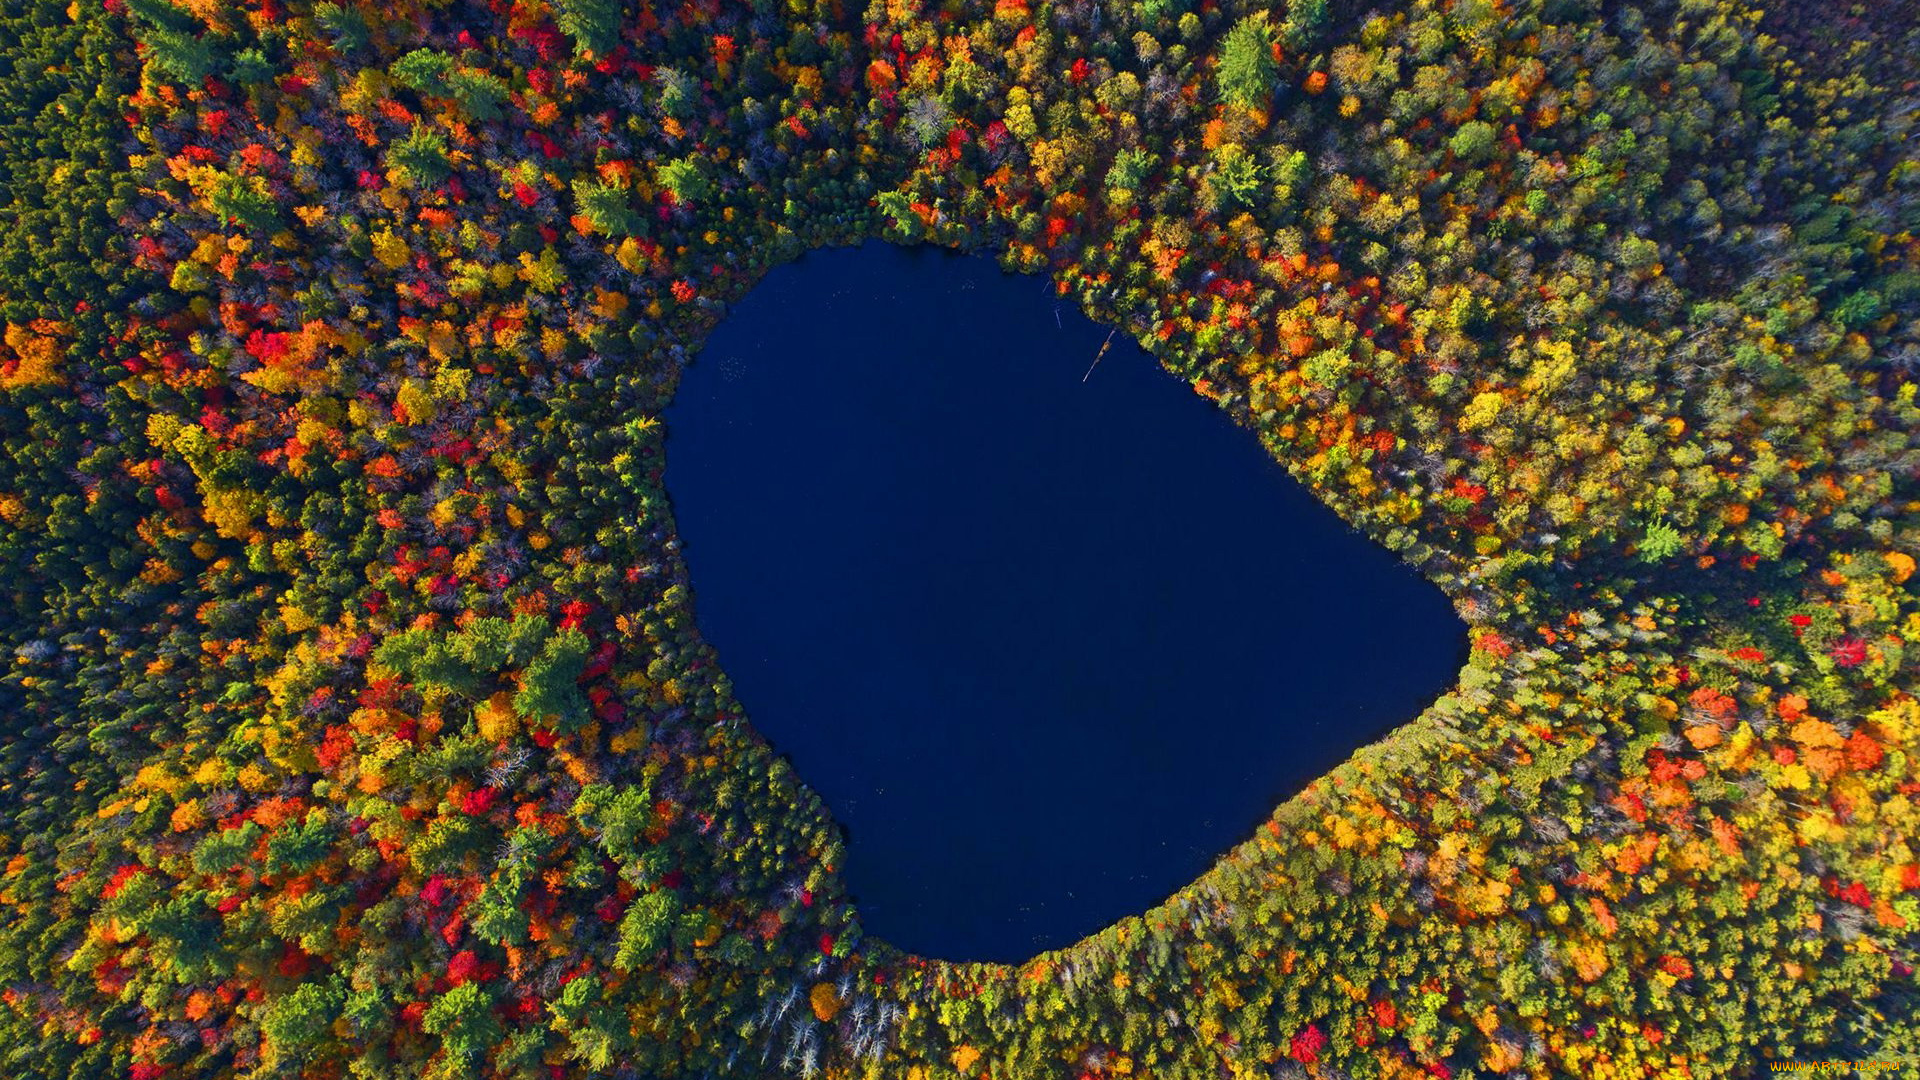 the, heart, of, the, adirondacks, new, york, state, природа, реки, озера, the, heart, of, adirondacks, new, york, state